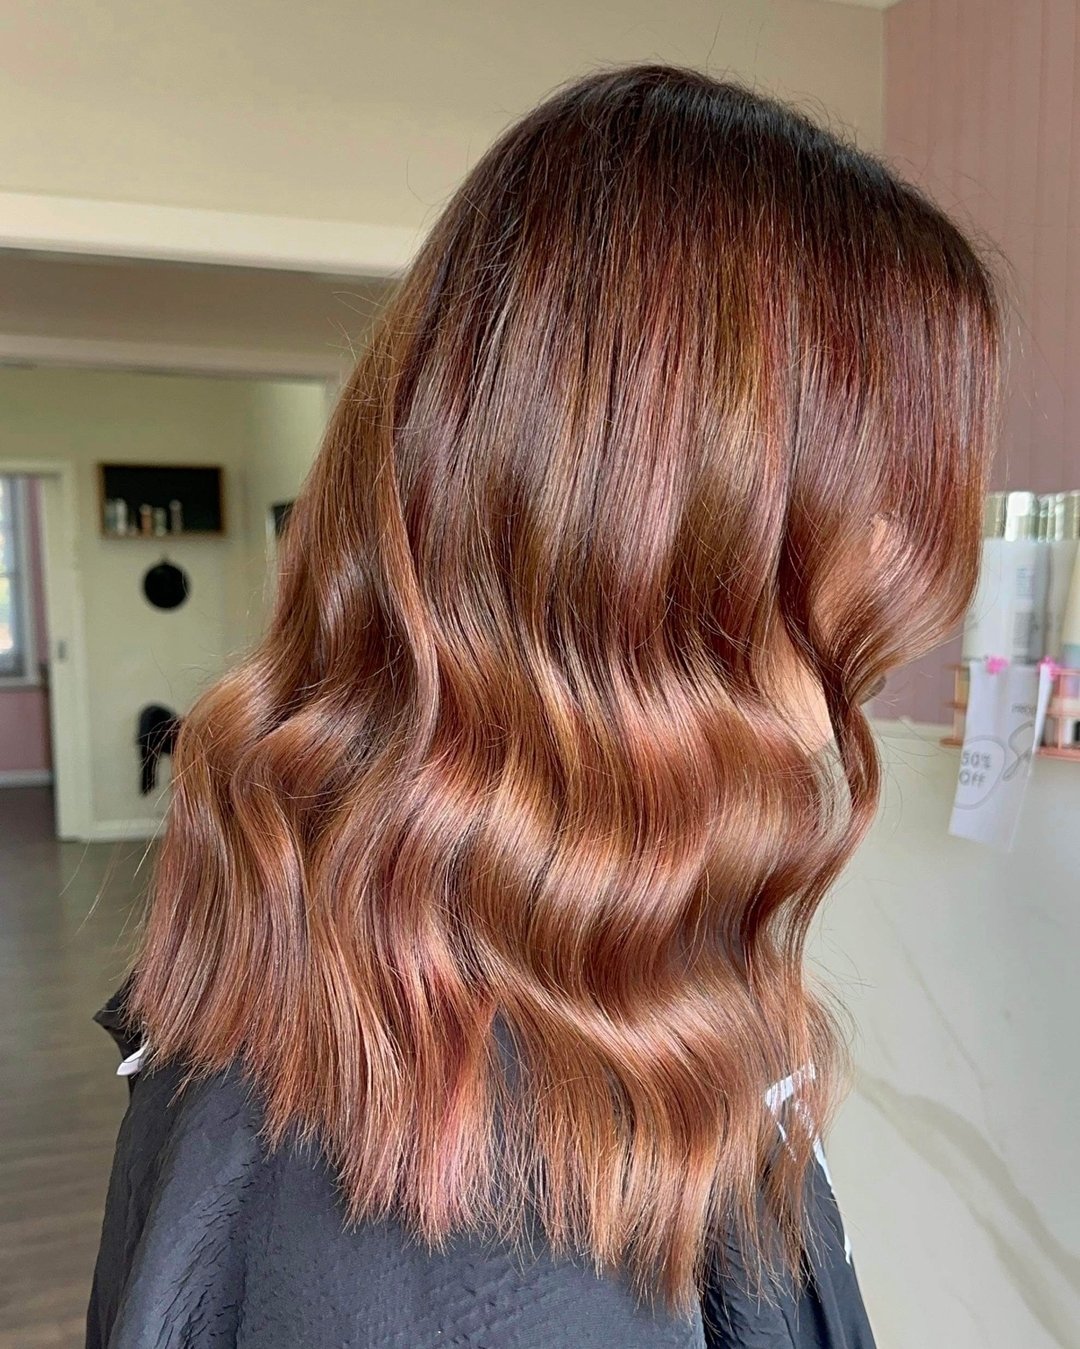 Our autumn predictions for this year:
🍁 Dark coppers
🍁 Cherry Cola red
🍁 Cowboy copper
🍁 Natural coppers with a warm blonde balayage 

@hairbymaygen is already executing 👏🏼👏🏼

#goochieshairdesign #dubbosalon #WellaProAnz #hair #wellaplex #wel